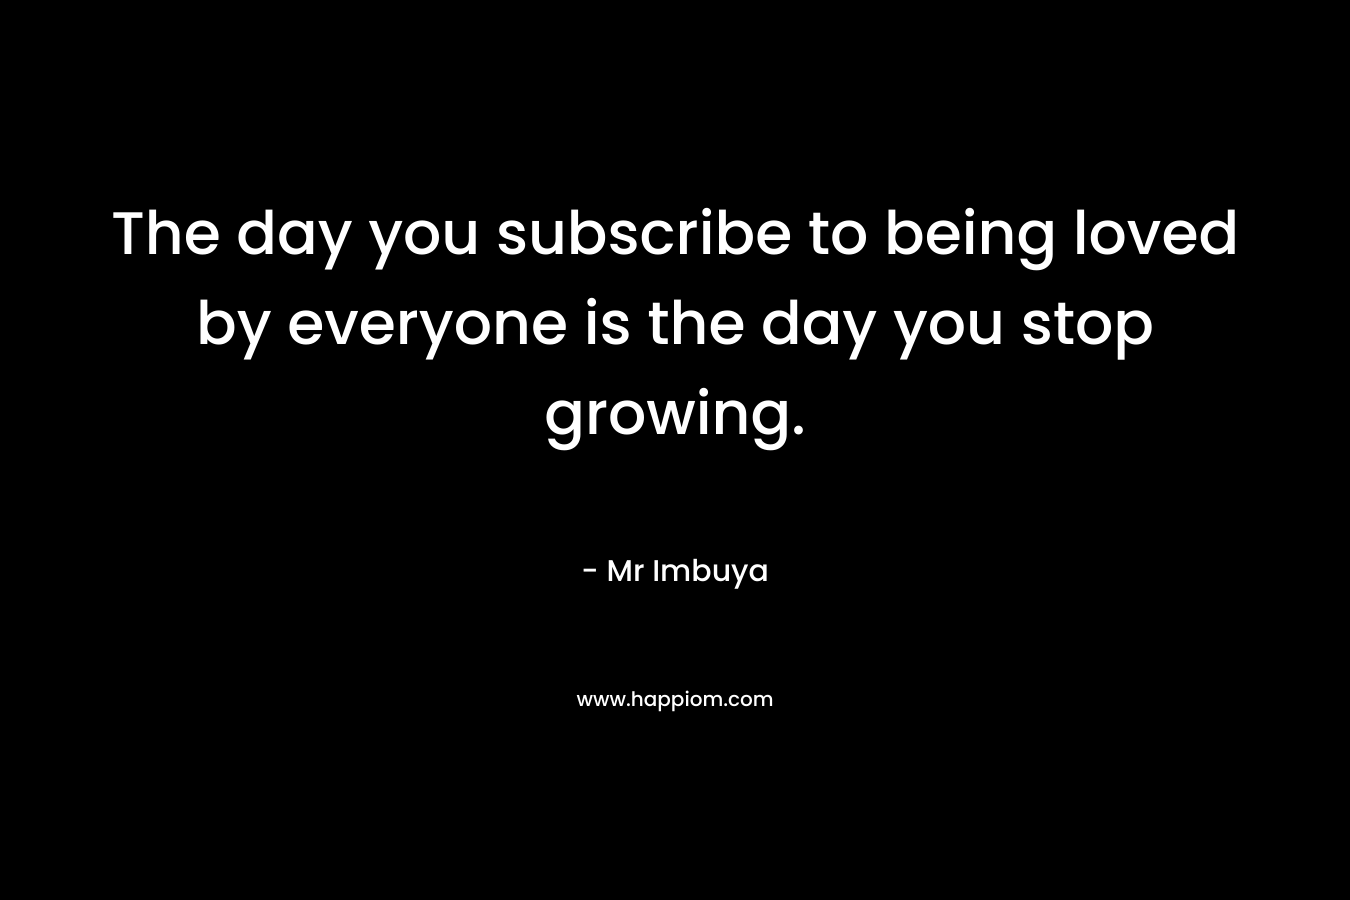 The day you subscribe to being loved by everyone is the day you stop growing.